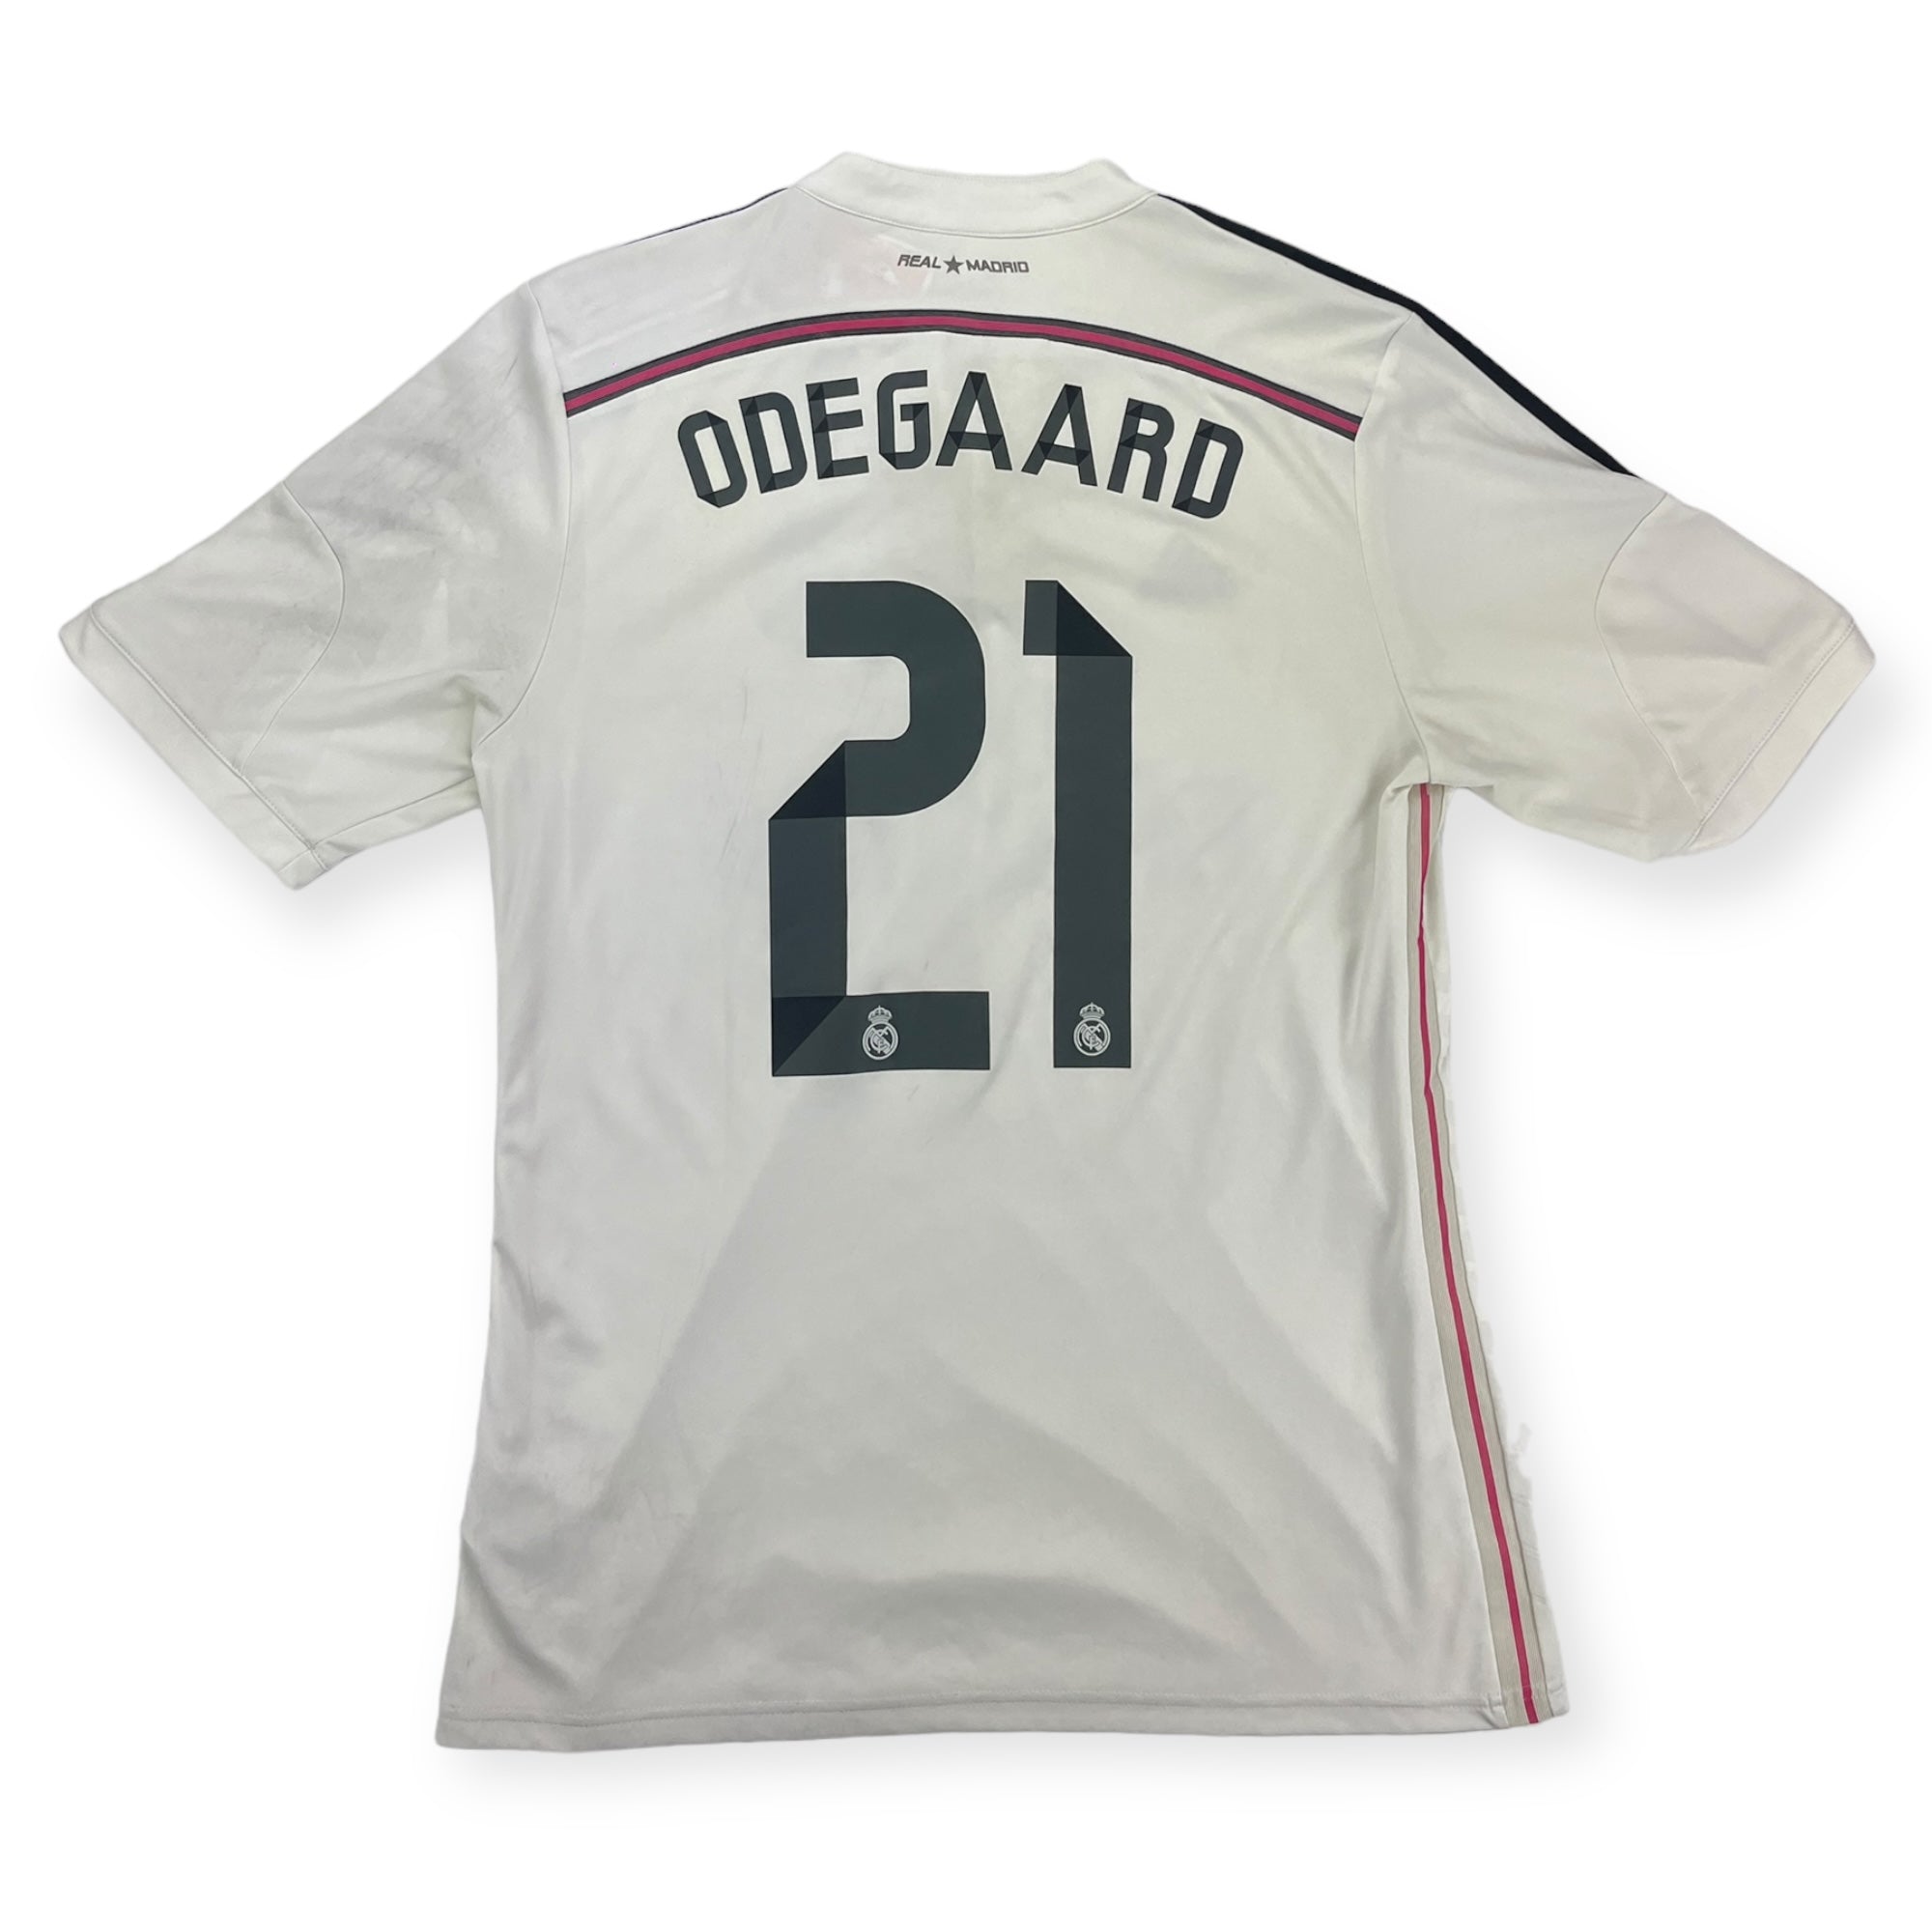 Real Madrid 2014 Home Shirt, Odegaard 21